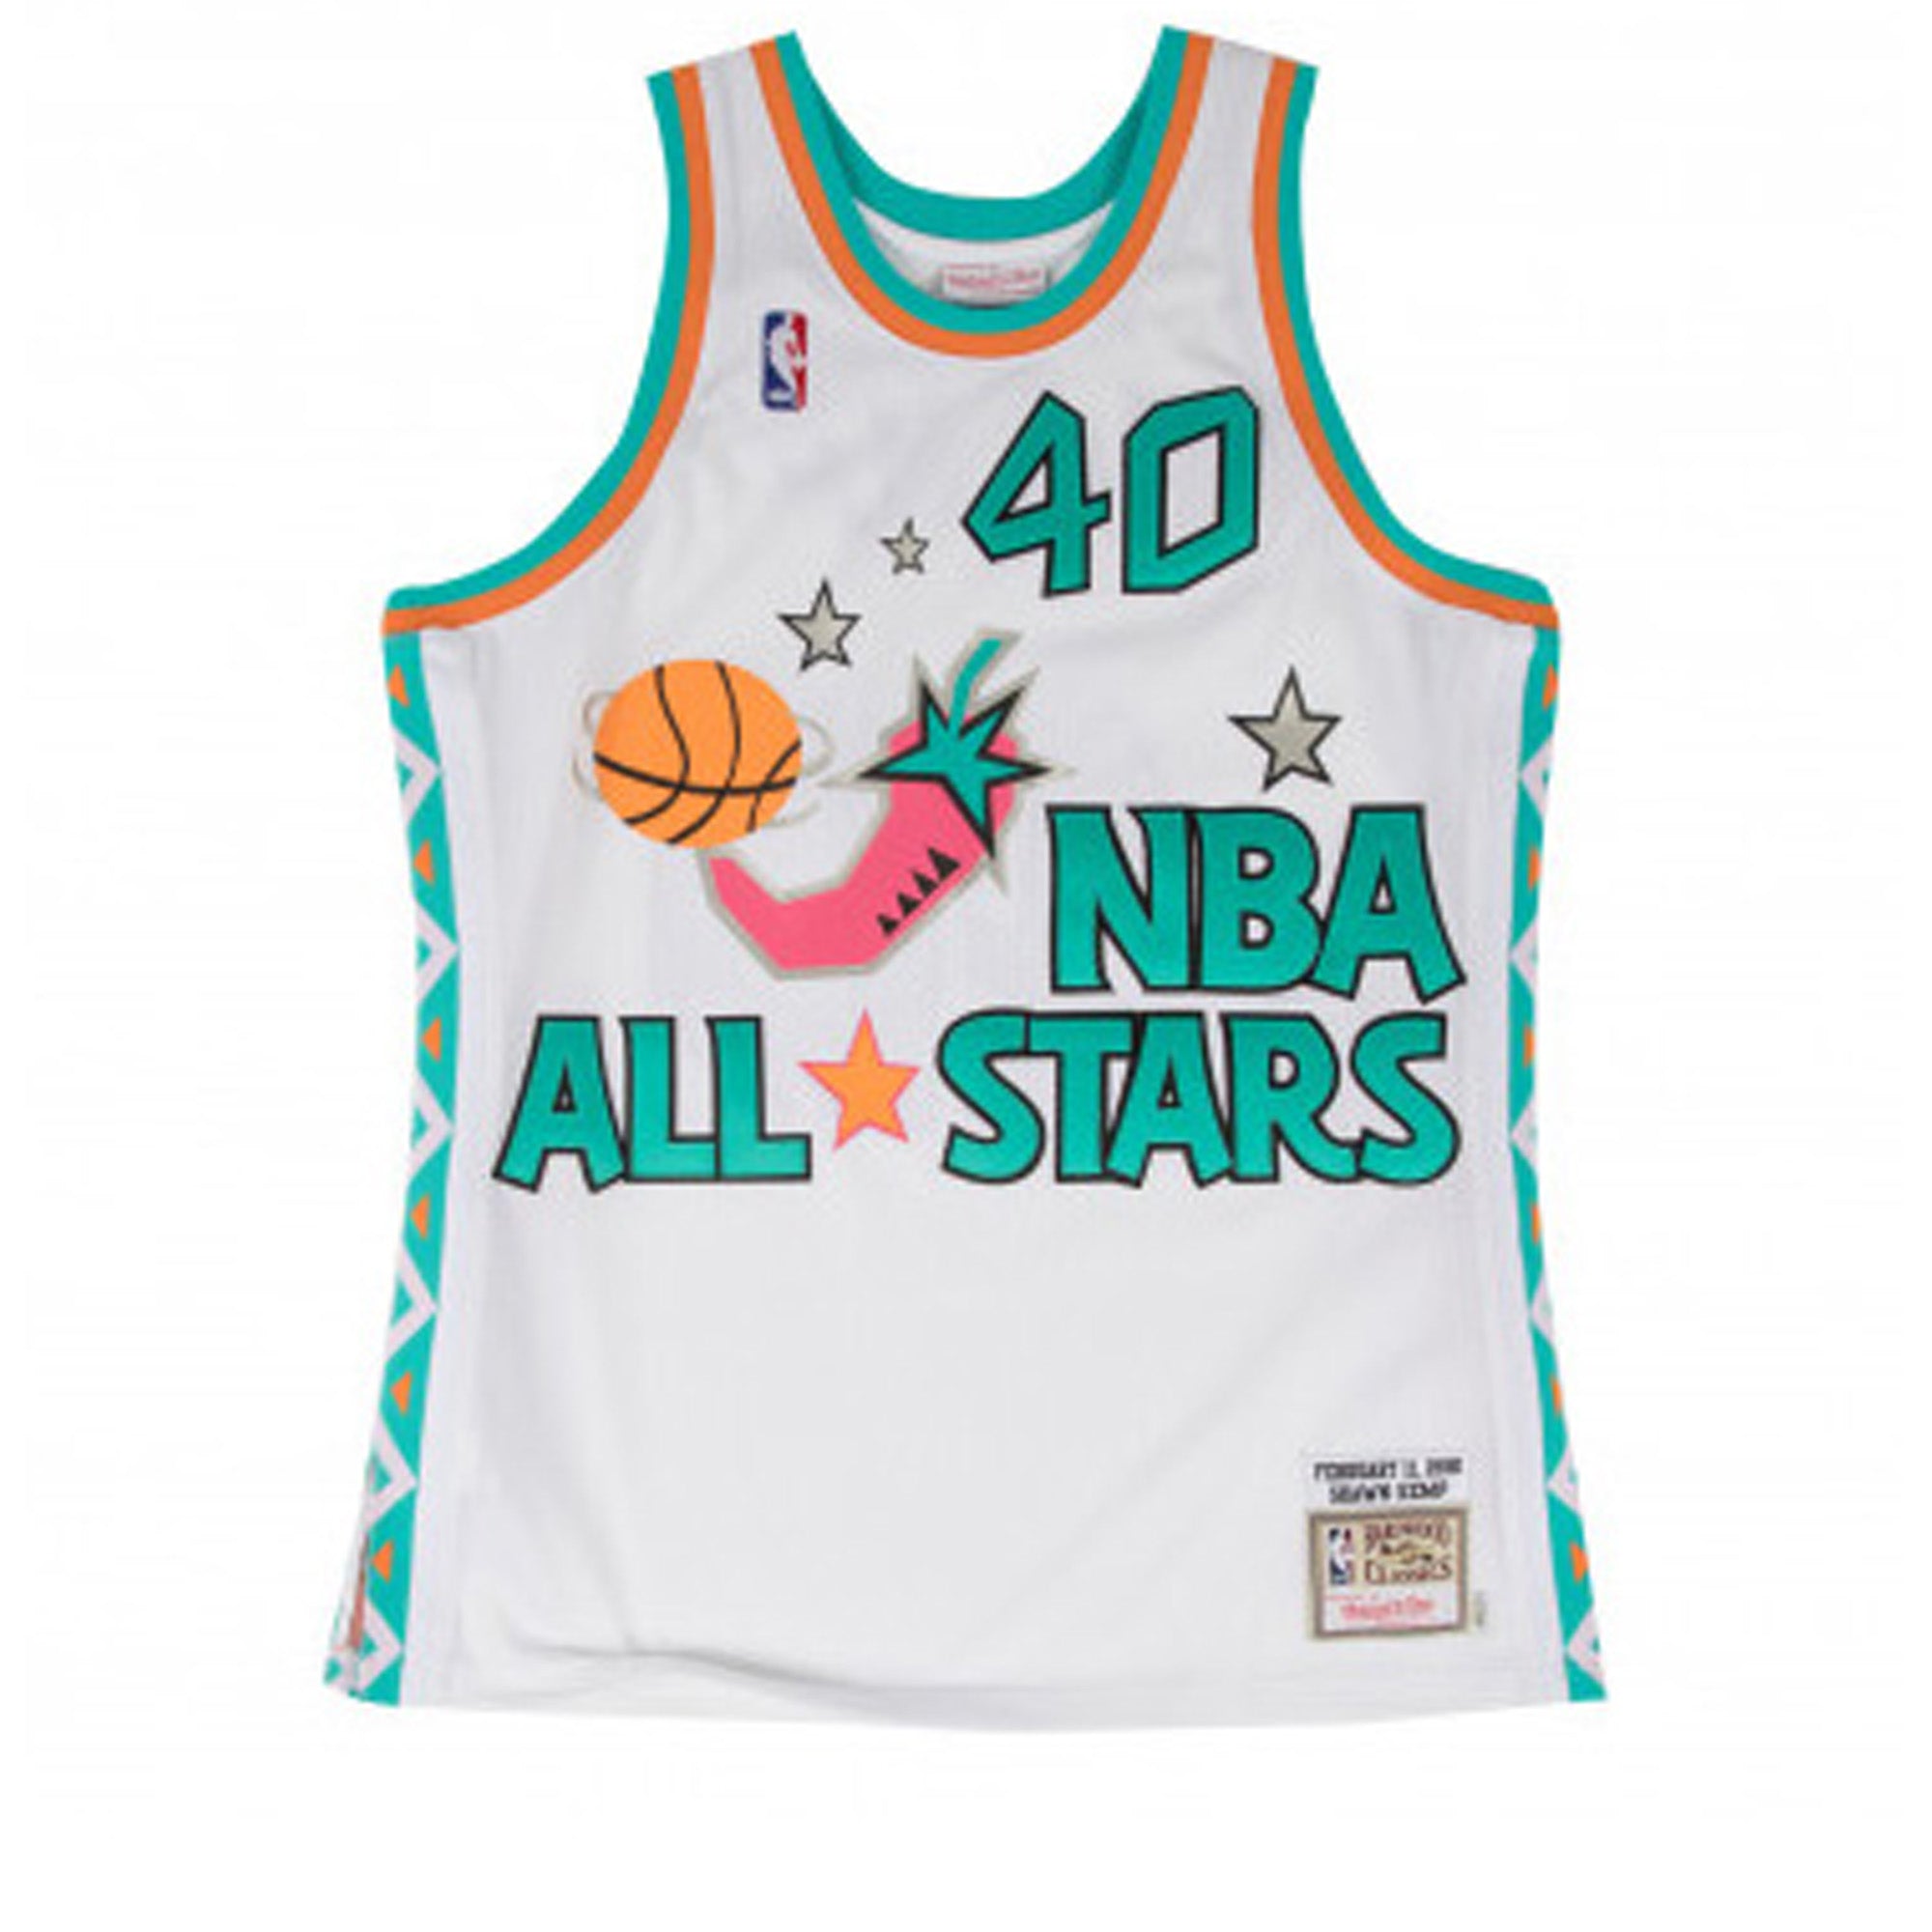 1995 All Star jersey creation opinion and thoughts if its legit